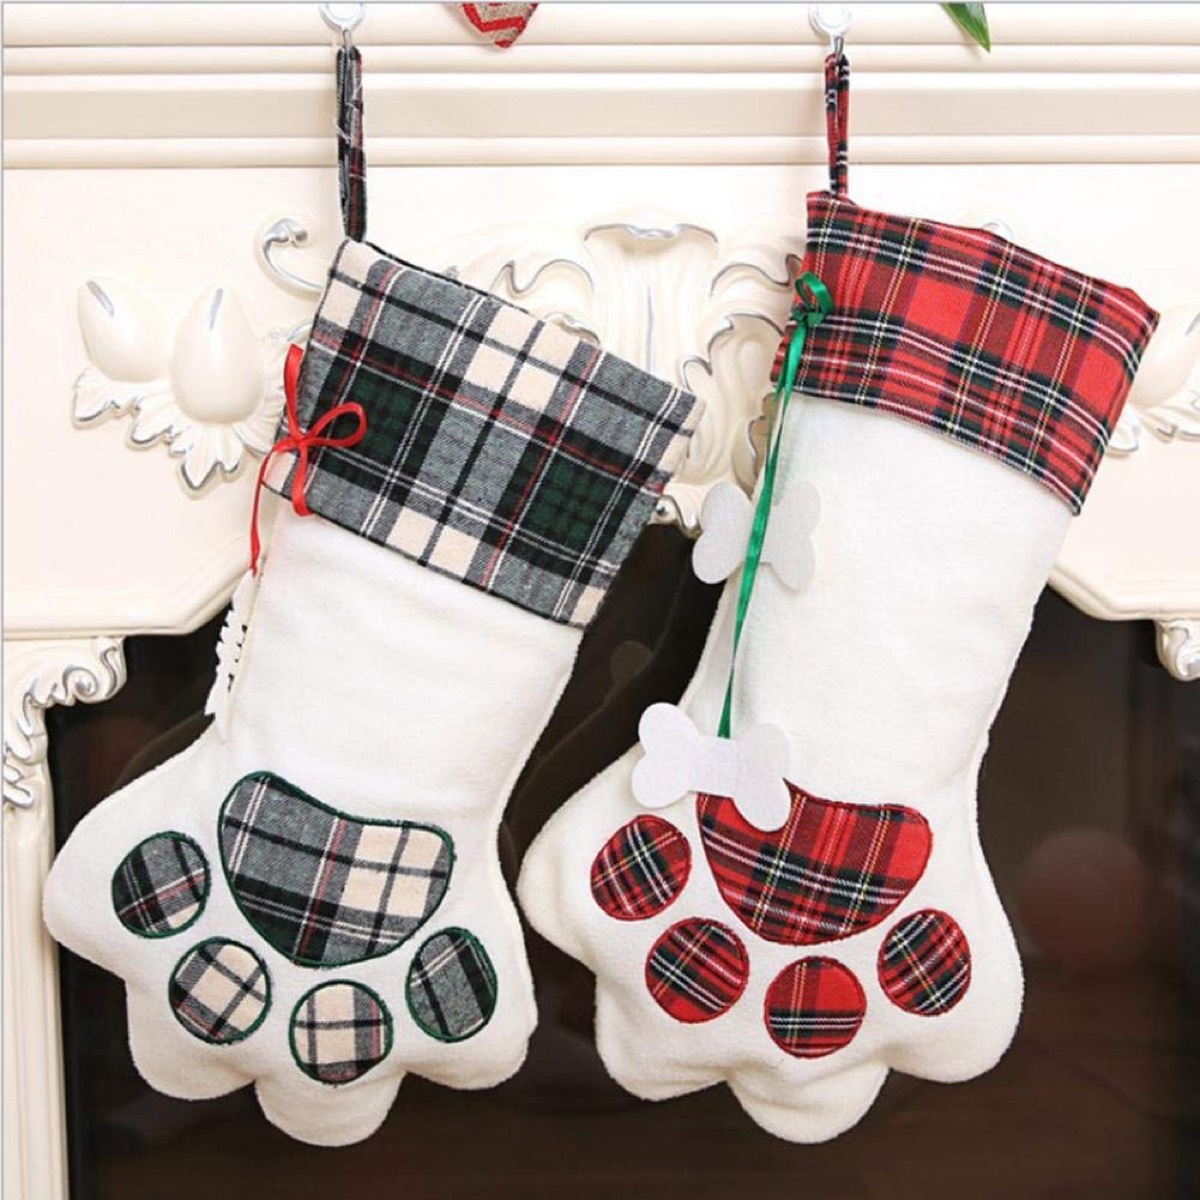 two plaid and white stockings in dog paw pattern